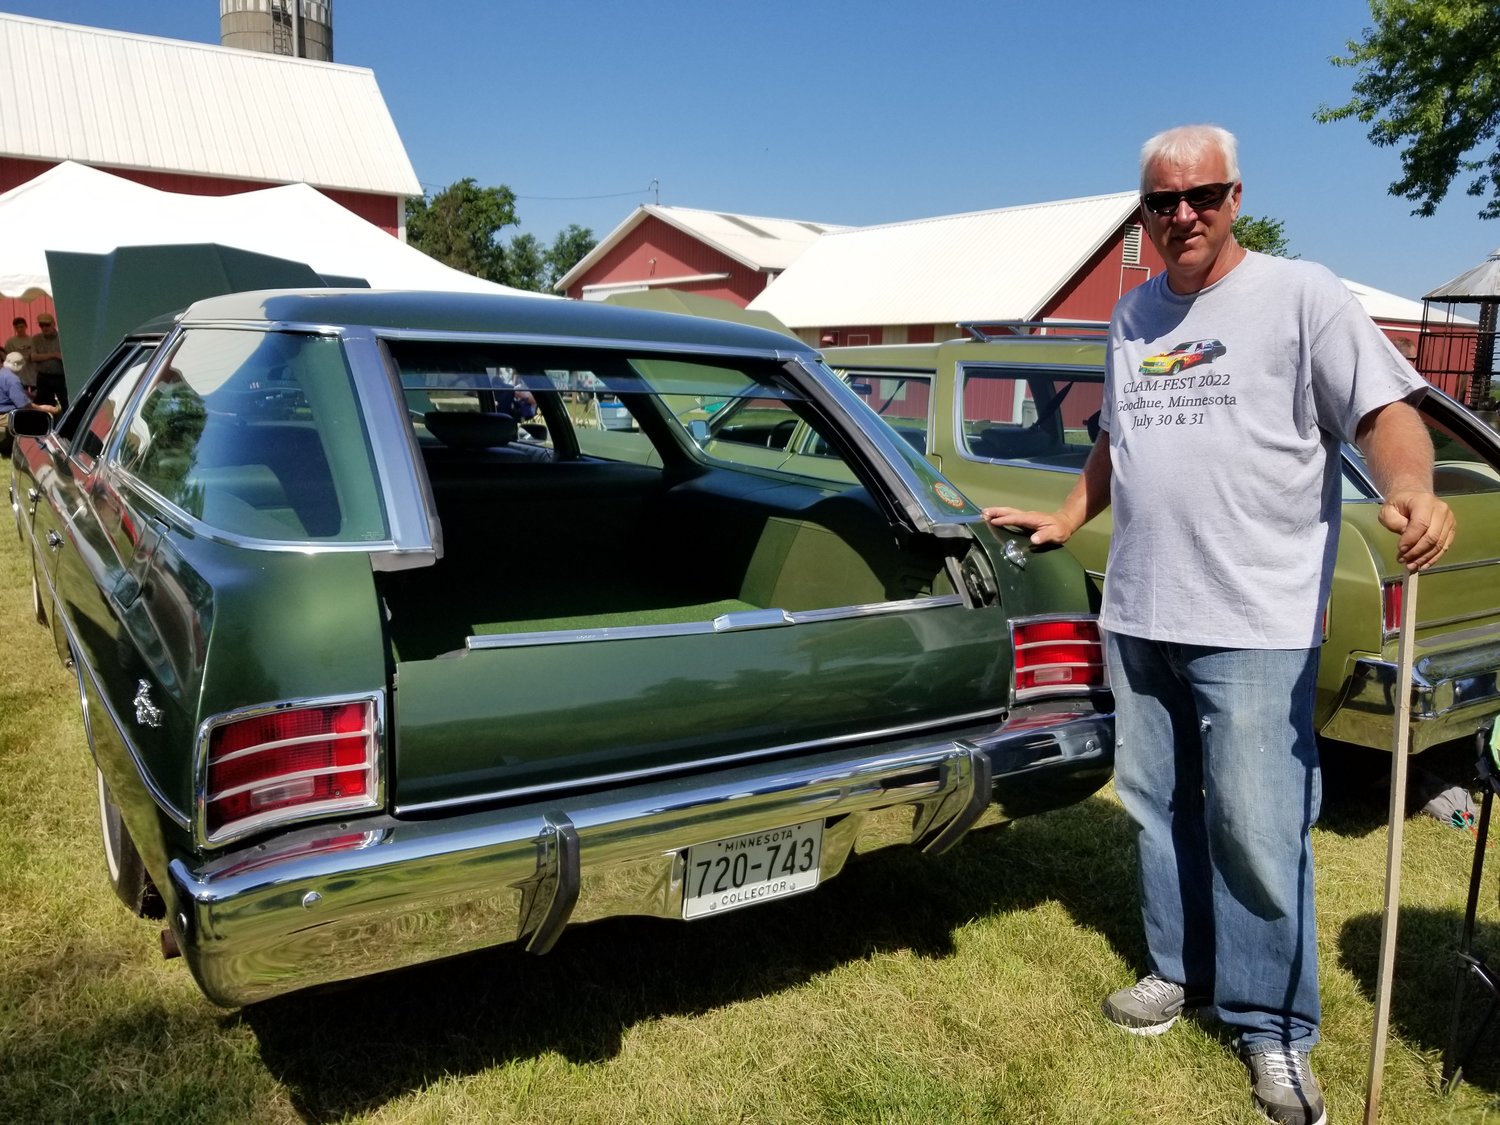 Hilbert Strusz stands next to one of the favorites in his GM Clamshell station wagon collection.  The unique Glide-Away tailgate is shown partially open.  The 1972 Chevrolet Kingswood has only 22,000 miles and its original headlight bulbs and tires.  Strusz hosted the 2nd annual Clam-Fest car show on his farm near Goodhue.